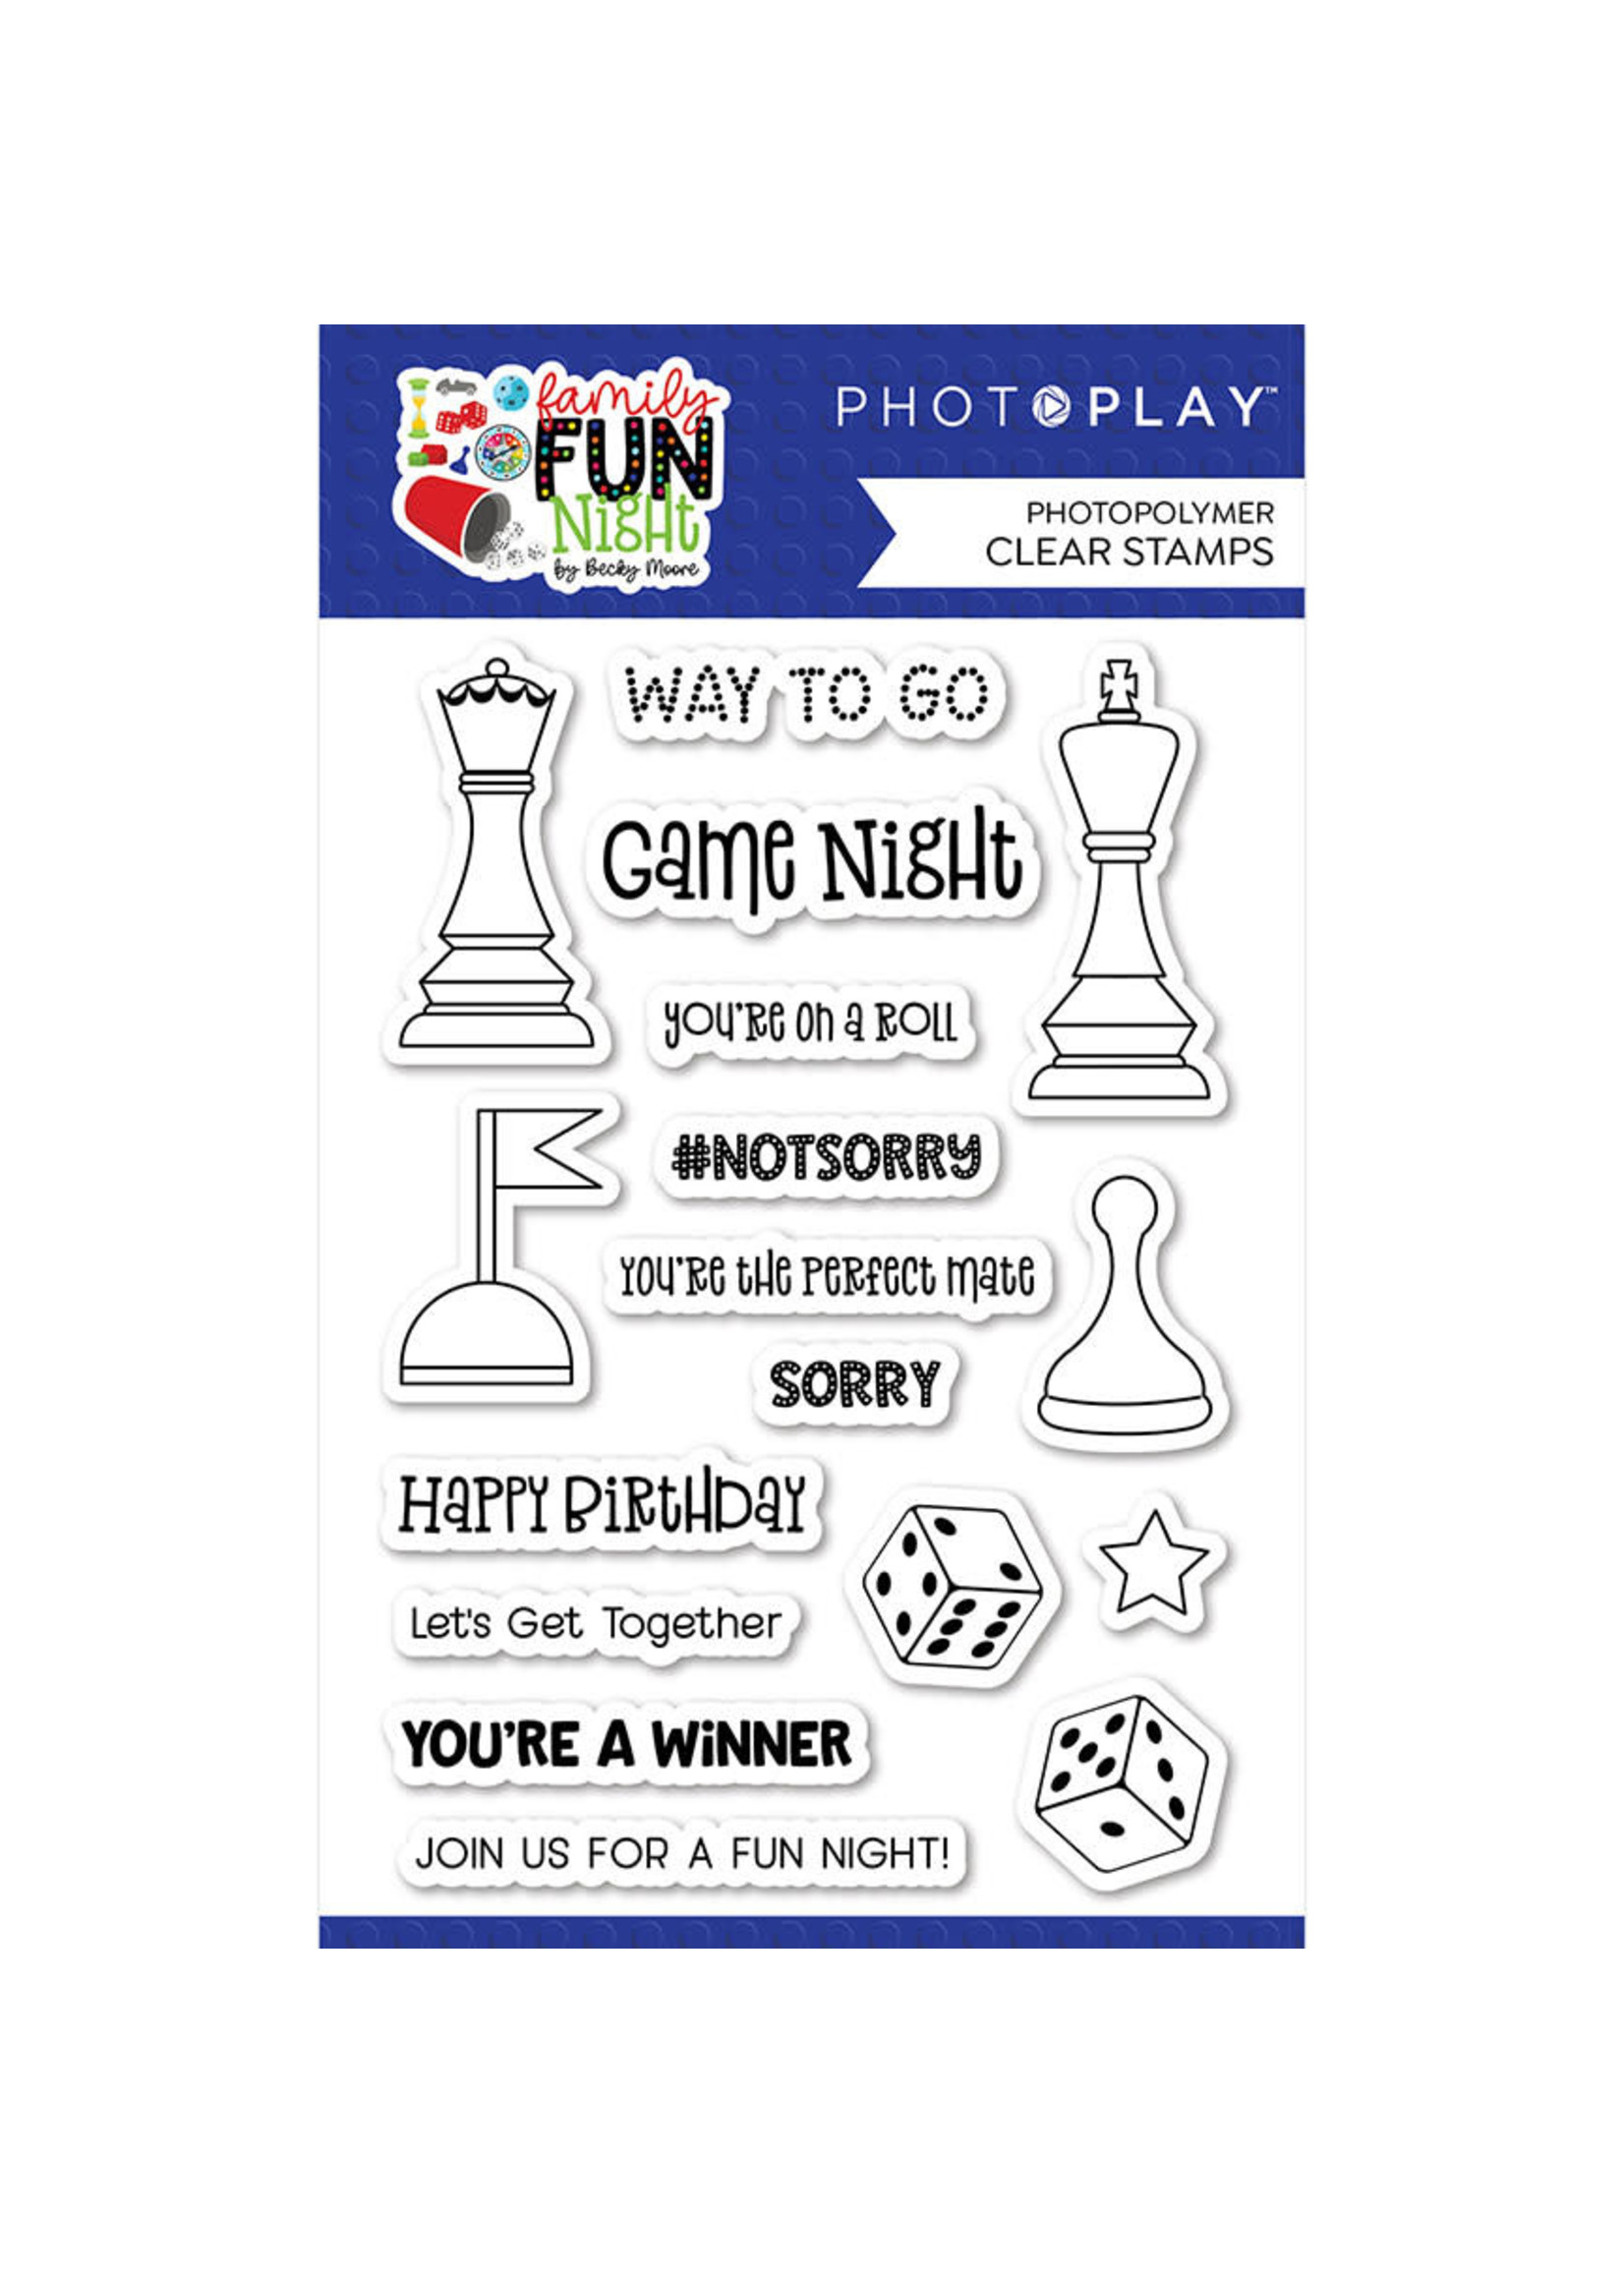 Photoplay Family Fun Night - Stamps